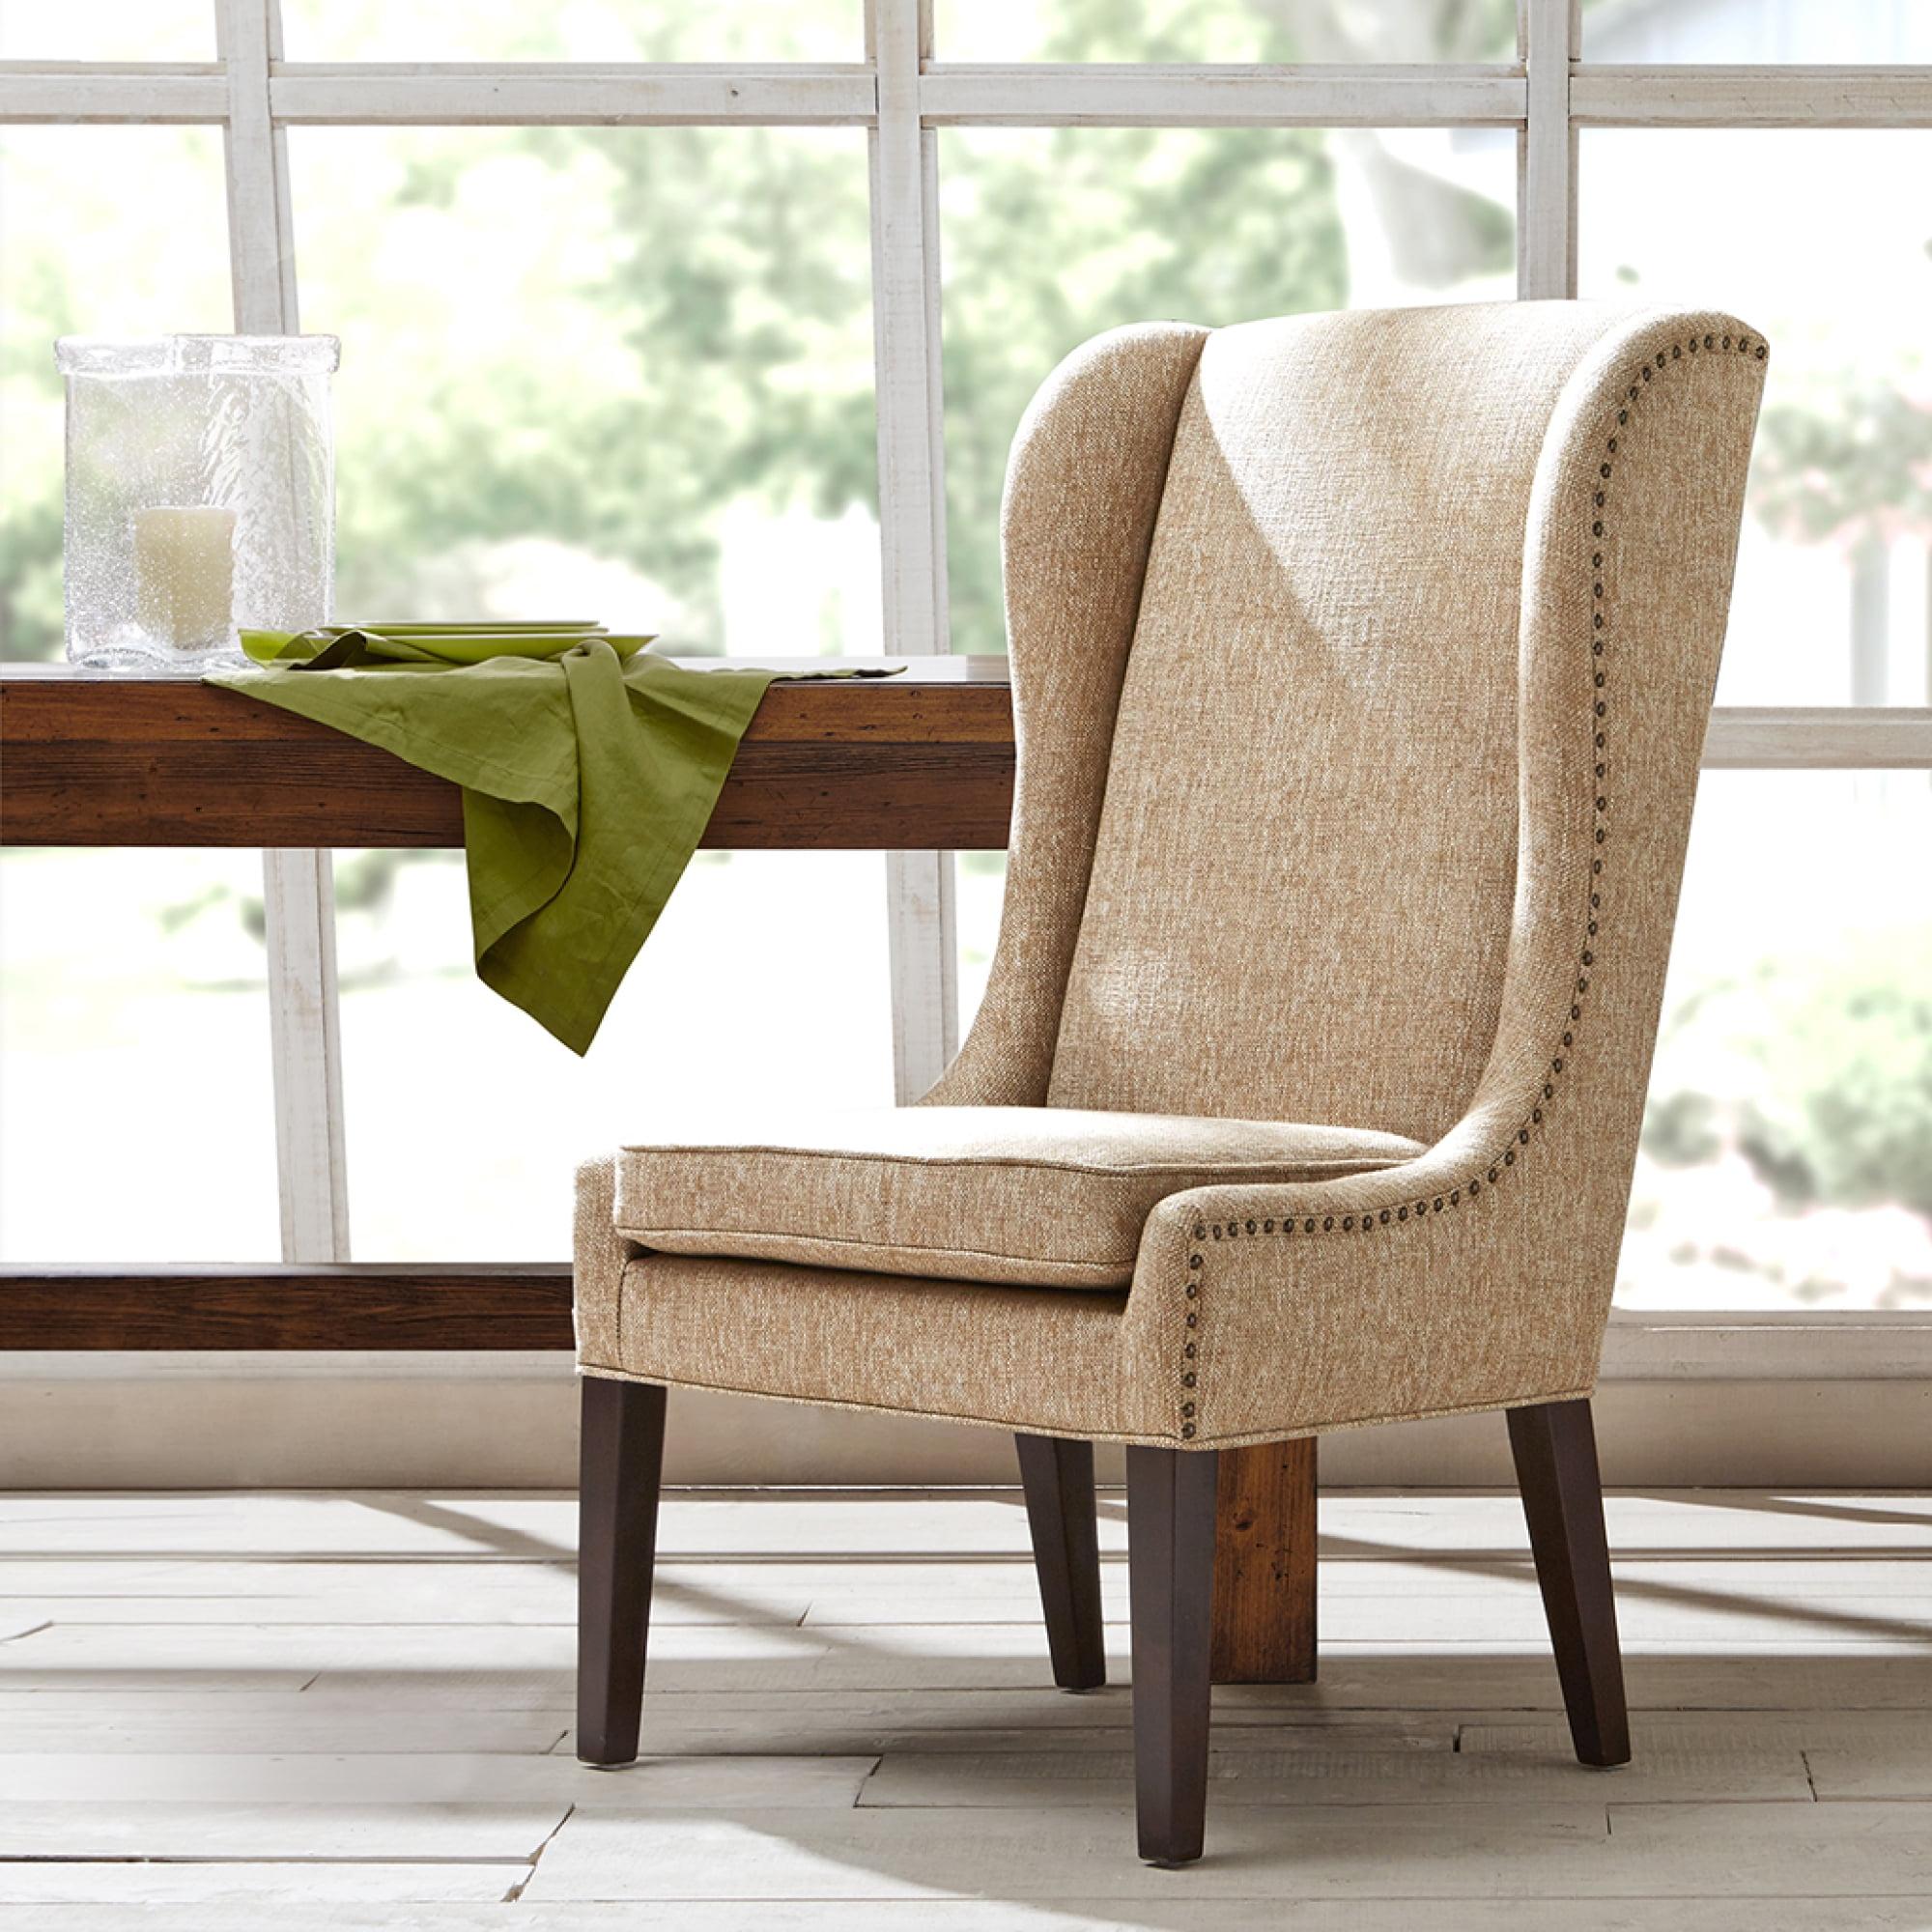 Elegant Tan High-Back Upholstered Side Chair with Nailhead Detail